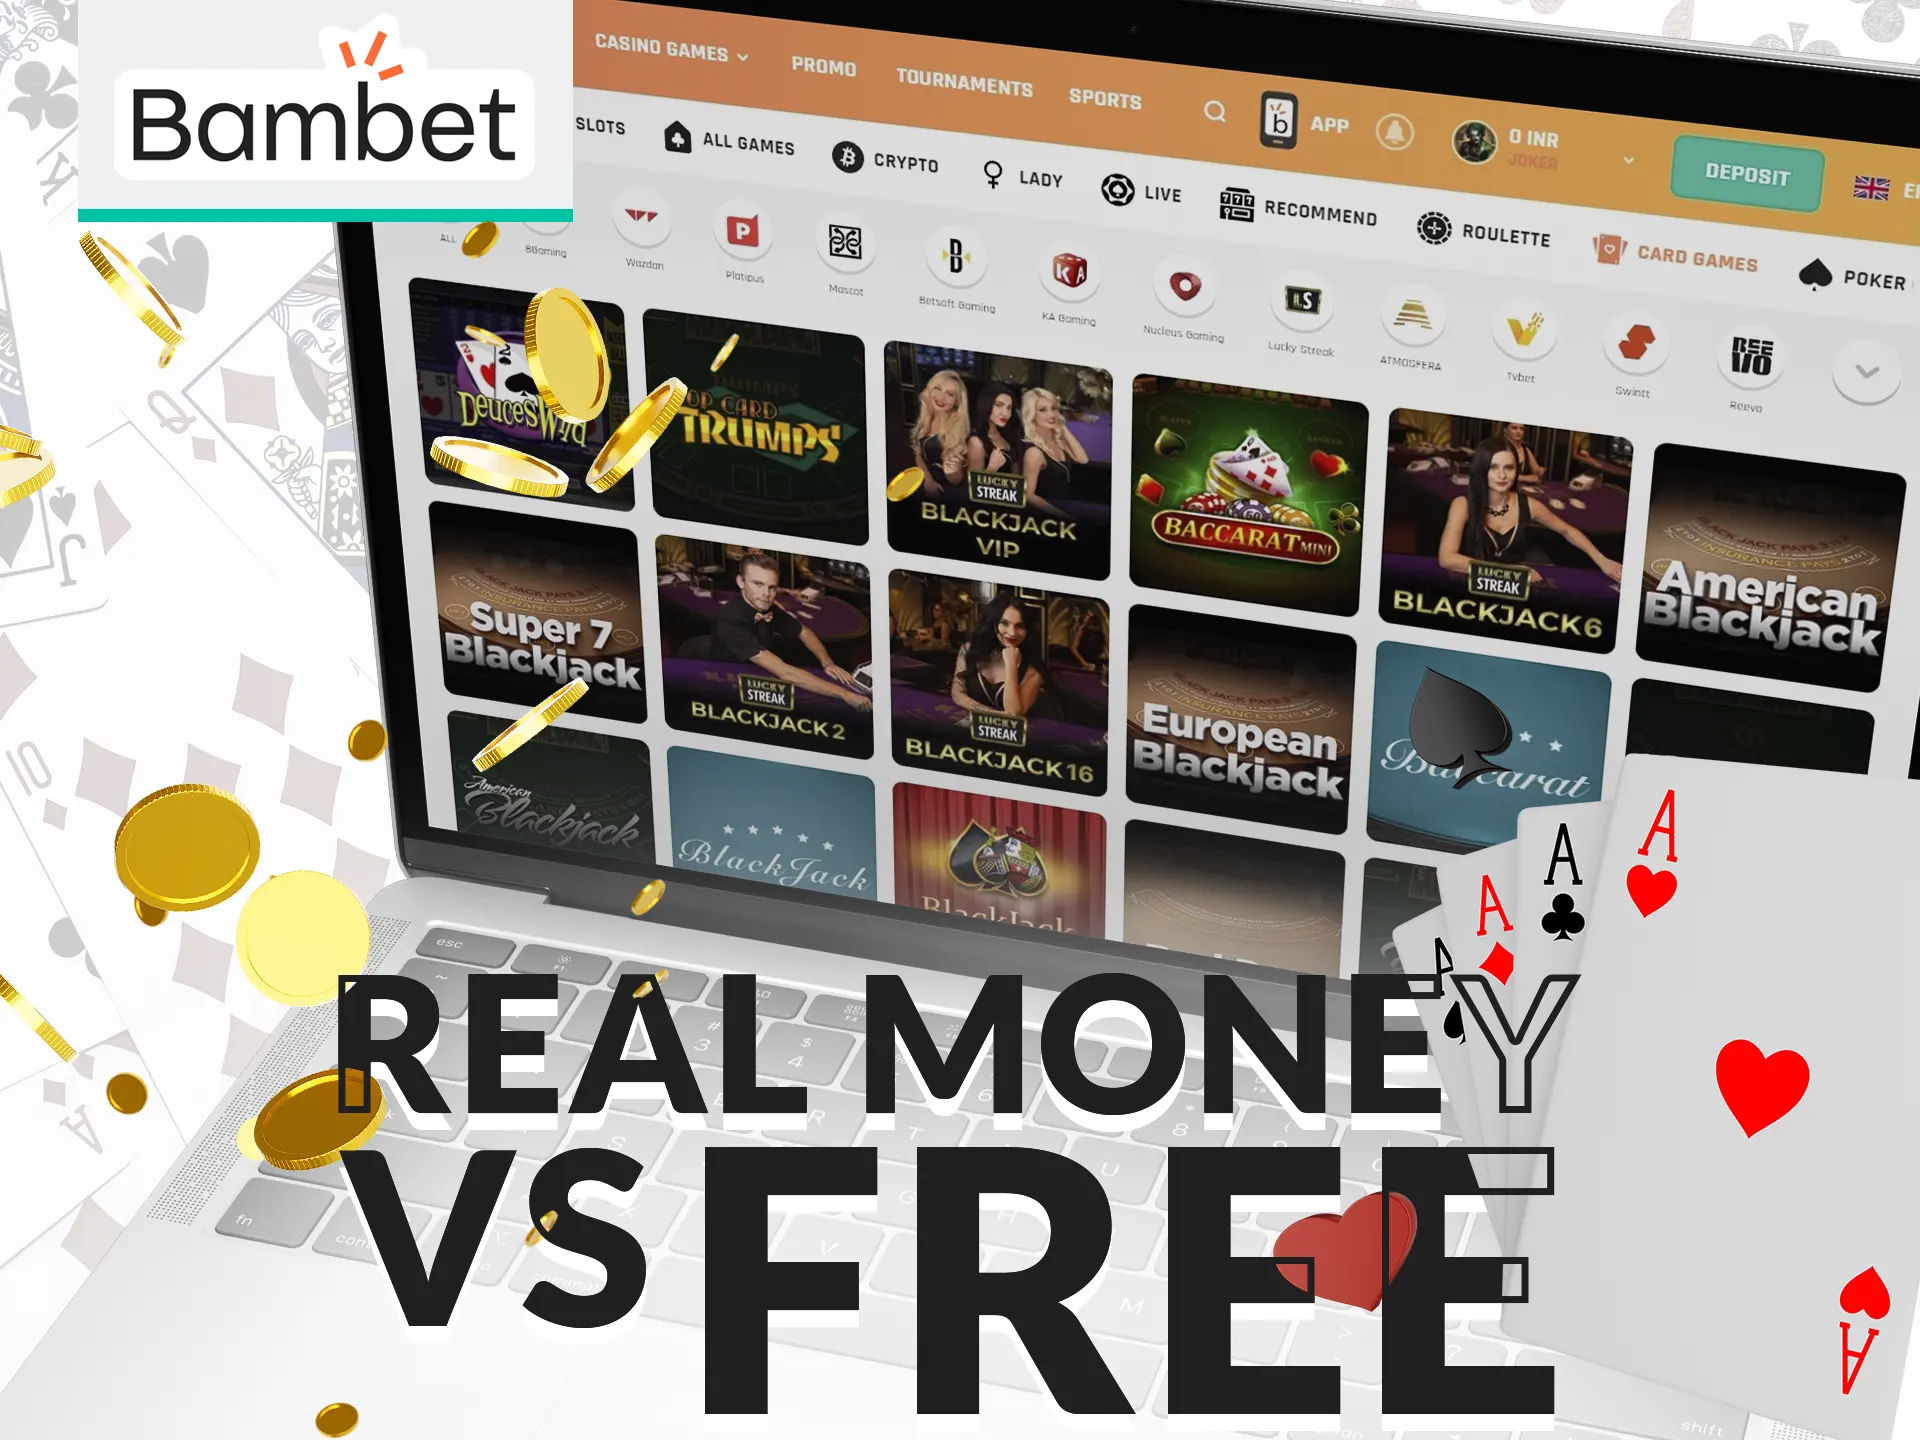 Learn about the differences between Real Money and Free card games on the Bambet website.